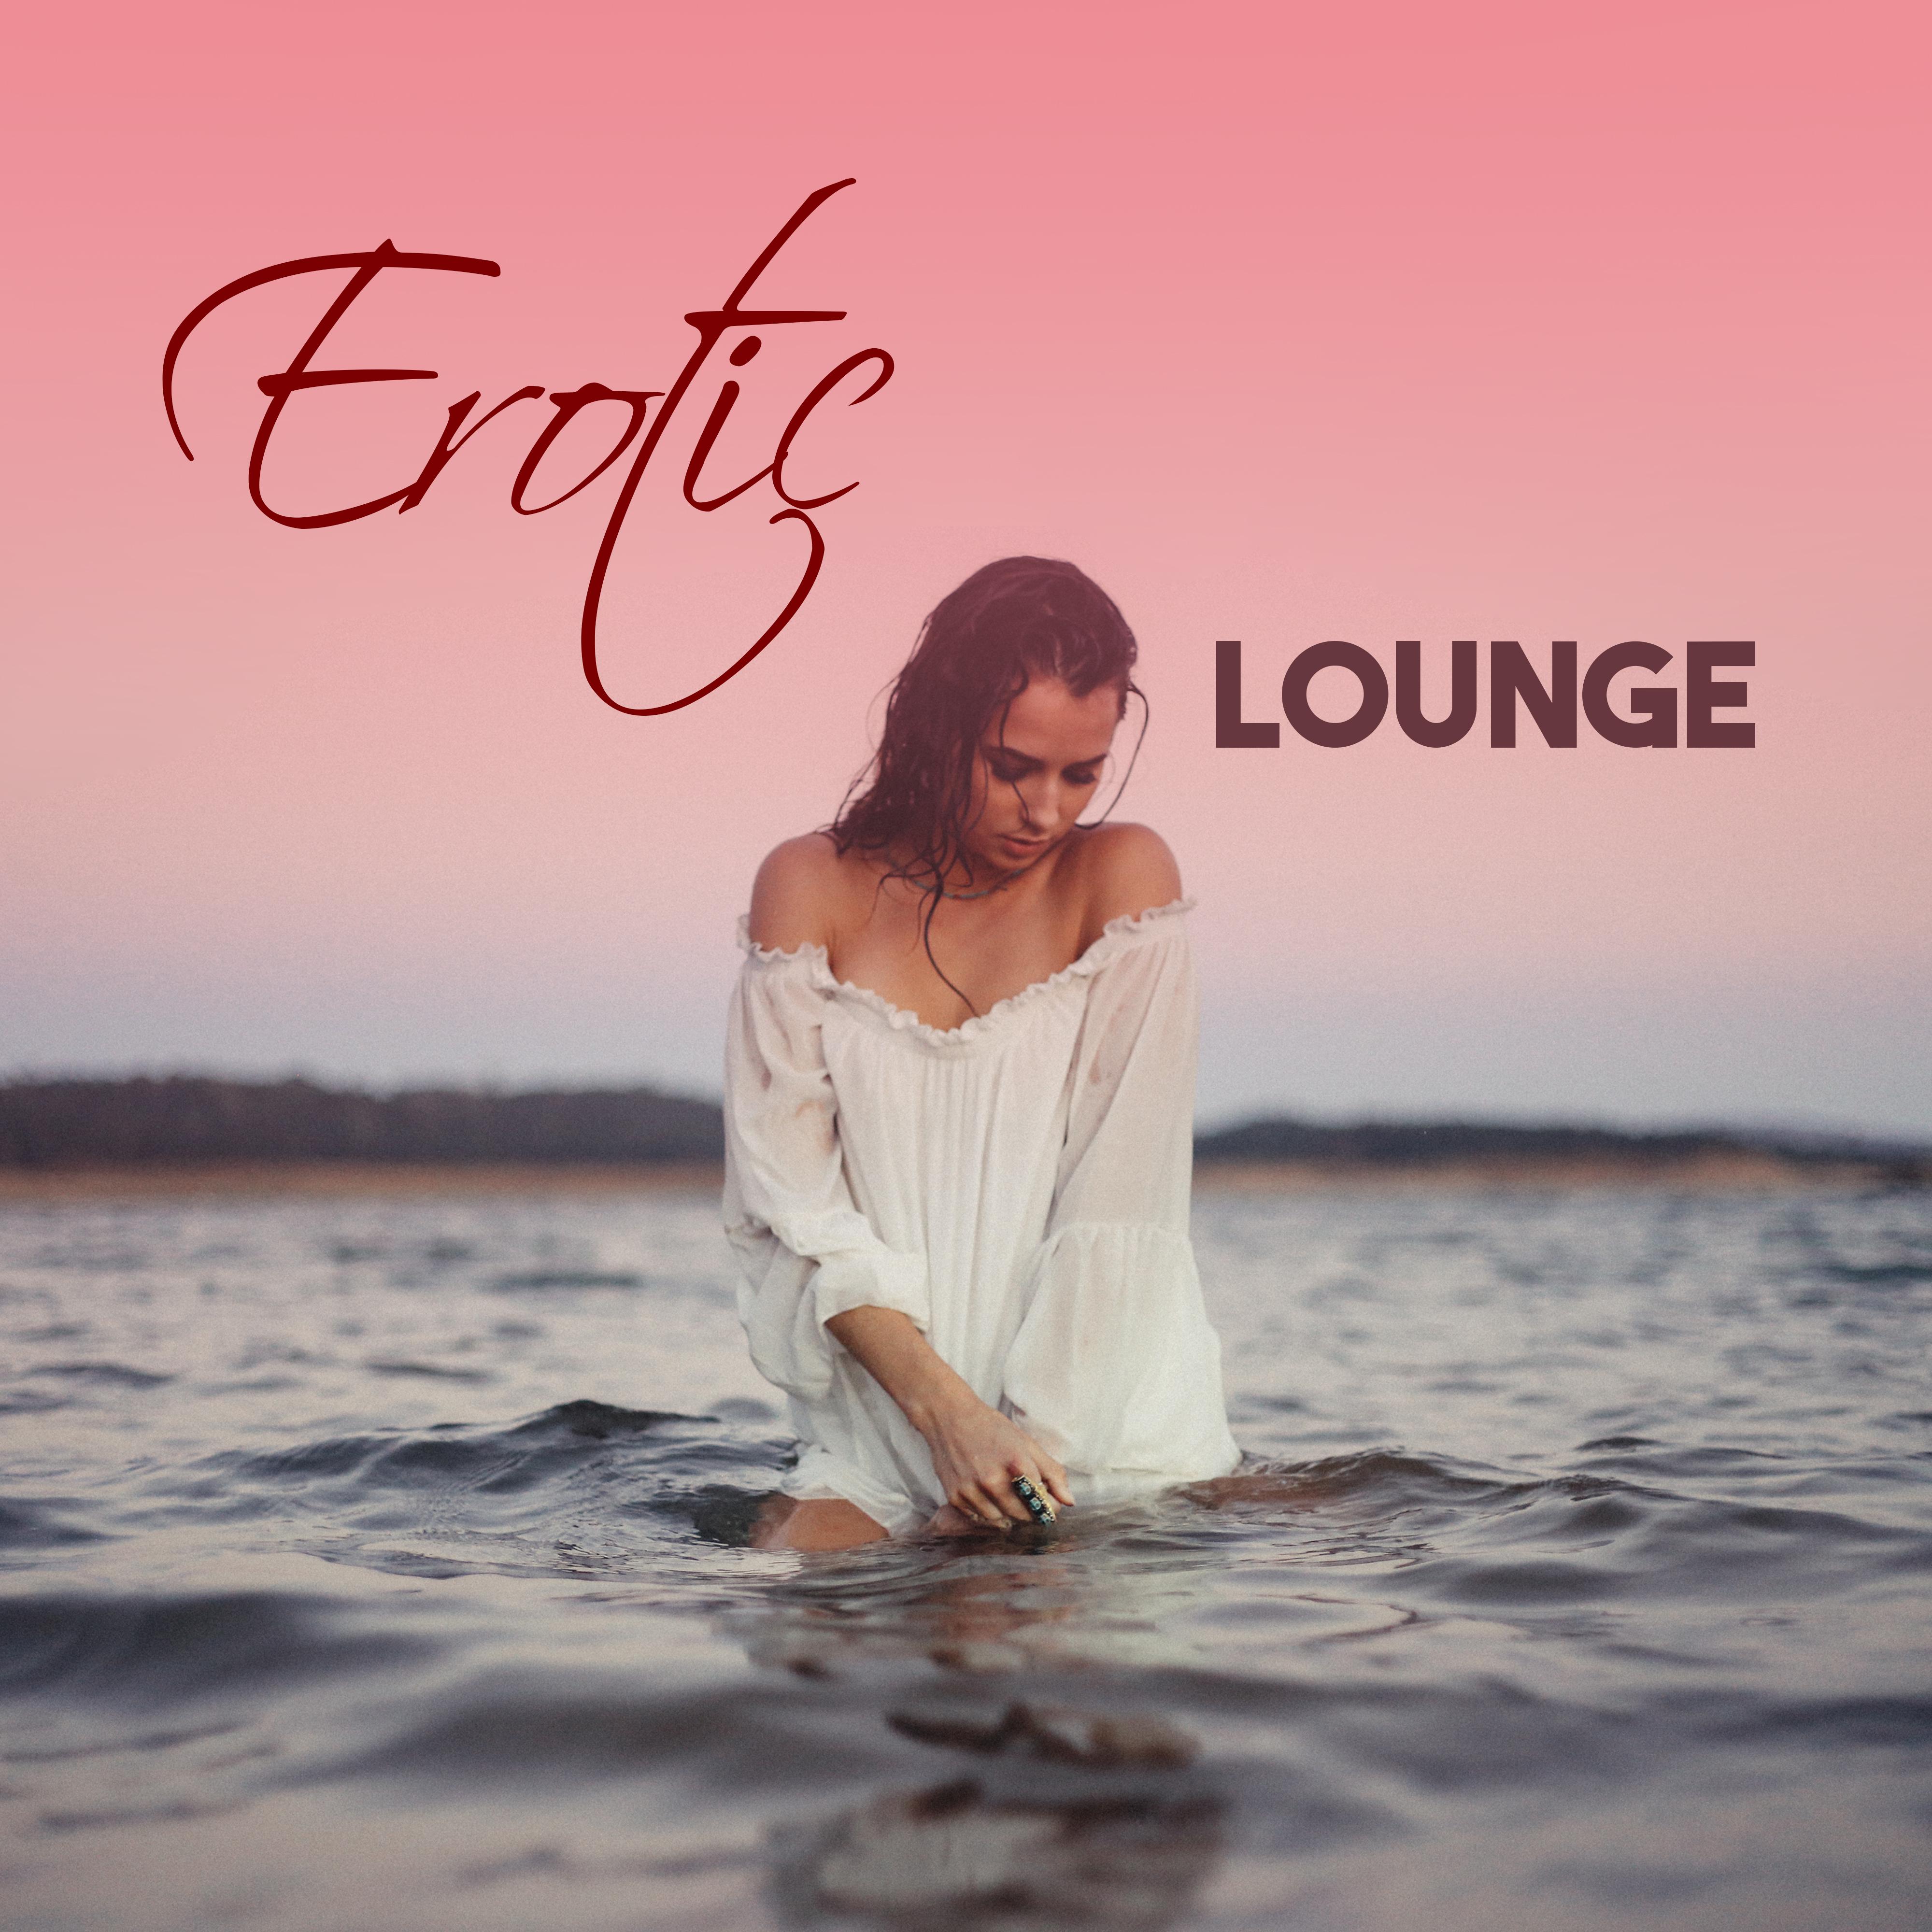 Erotic Lounge – Best Chill Out Music for Relaxation, Sensual Music, Deep Sun, Beach Lounge, Summertime